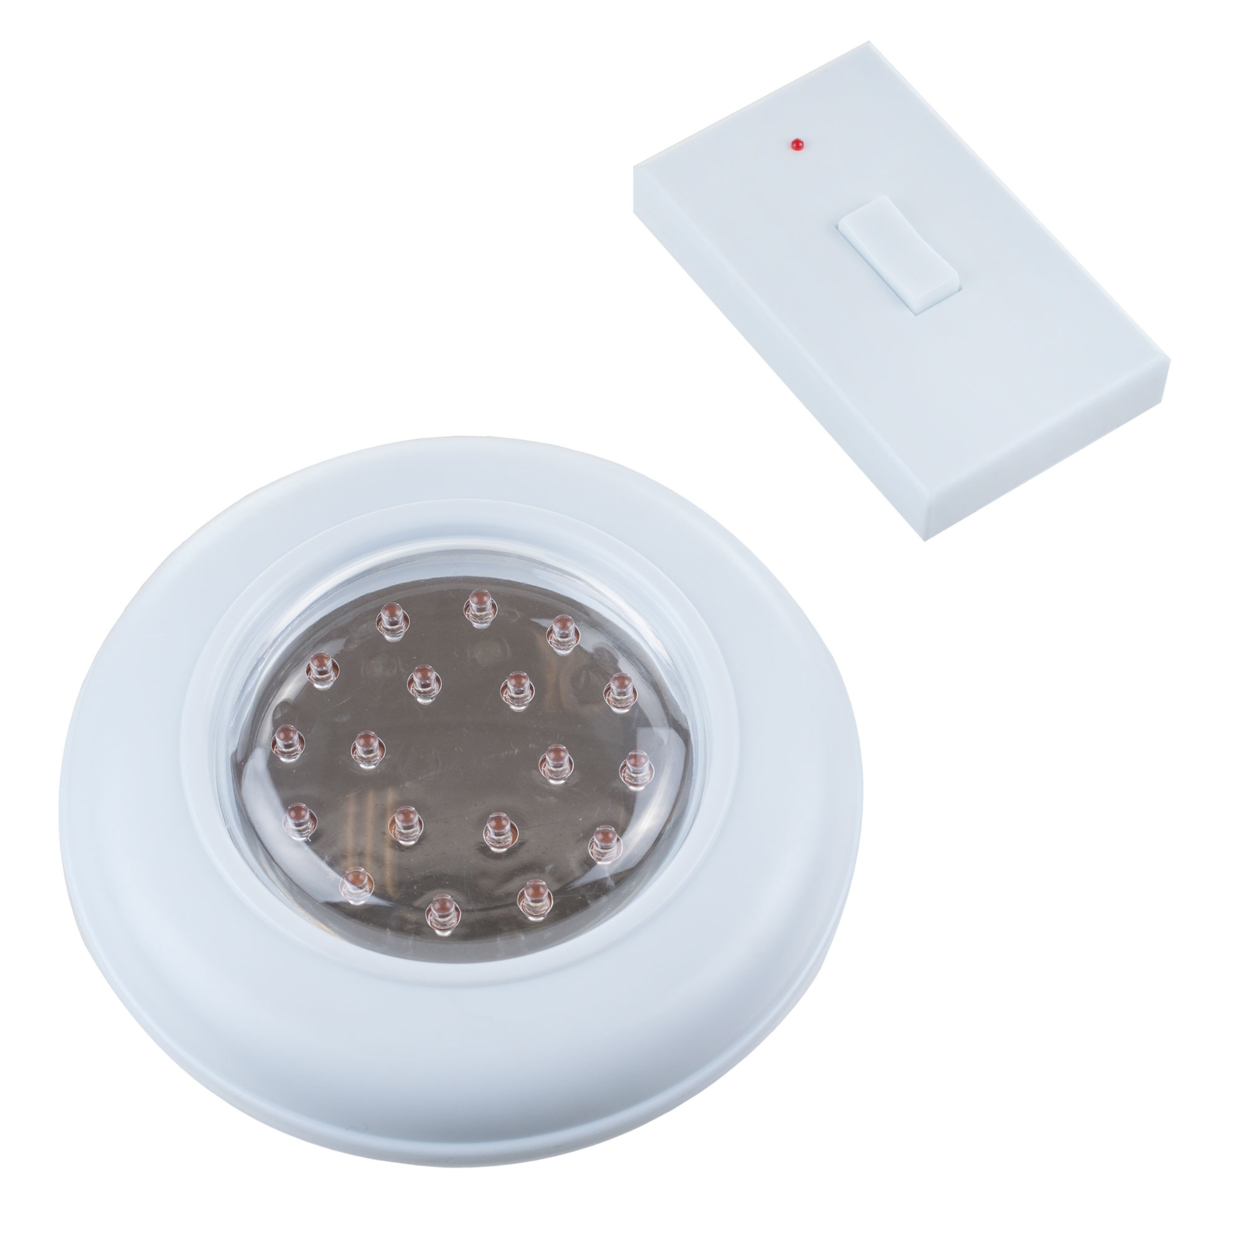 Cordless Ceiling/Wall Closet Light With Remote Control Light Switch 4 AA's Battery Operated